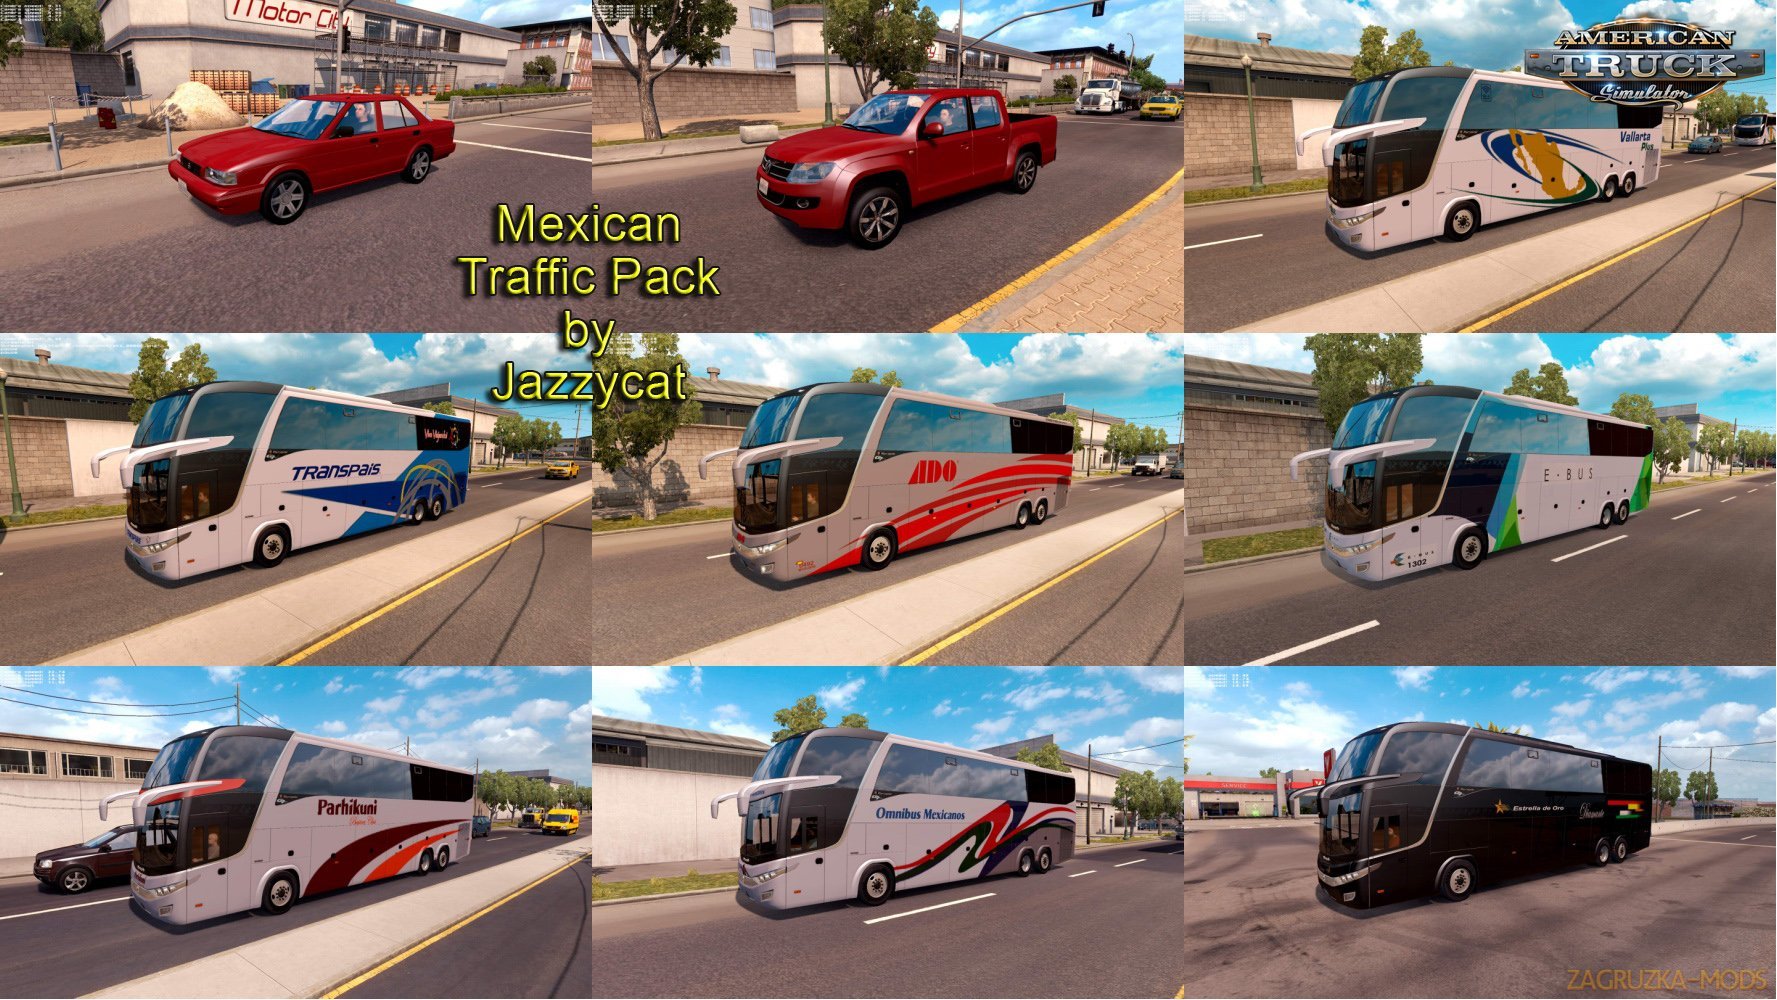 Mexican Traffic Pack v1.5 by Jazzycat